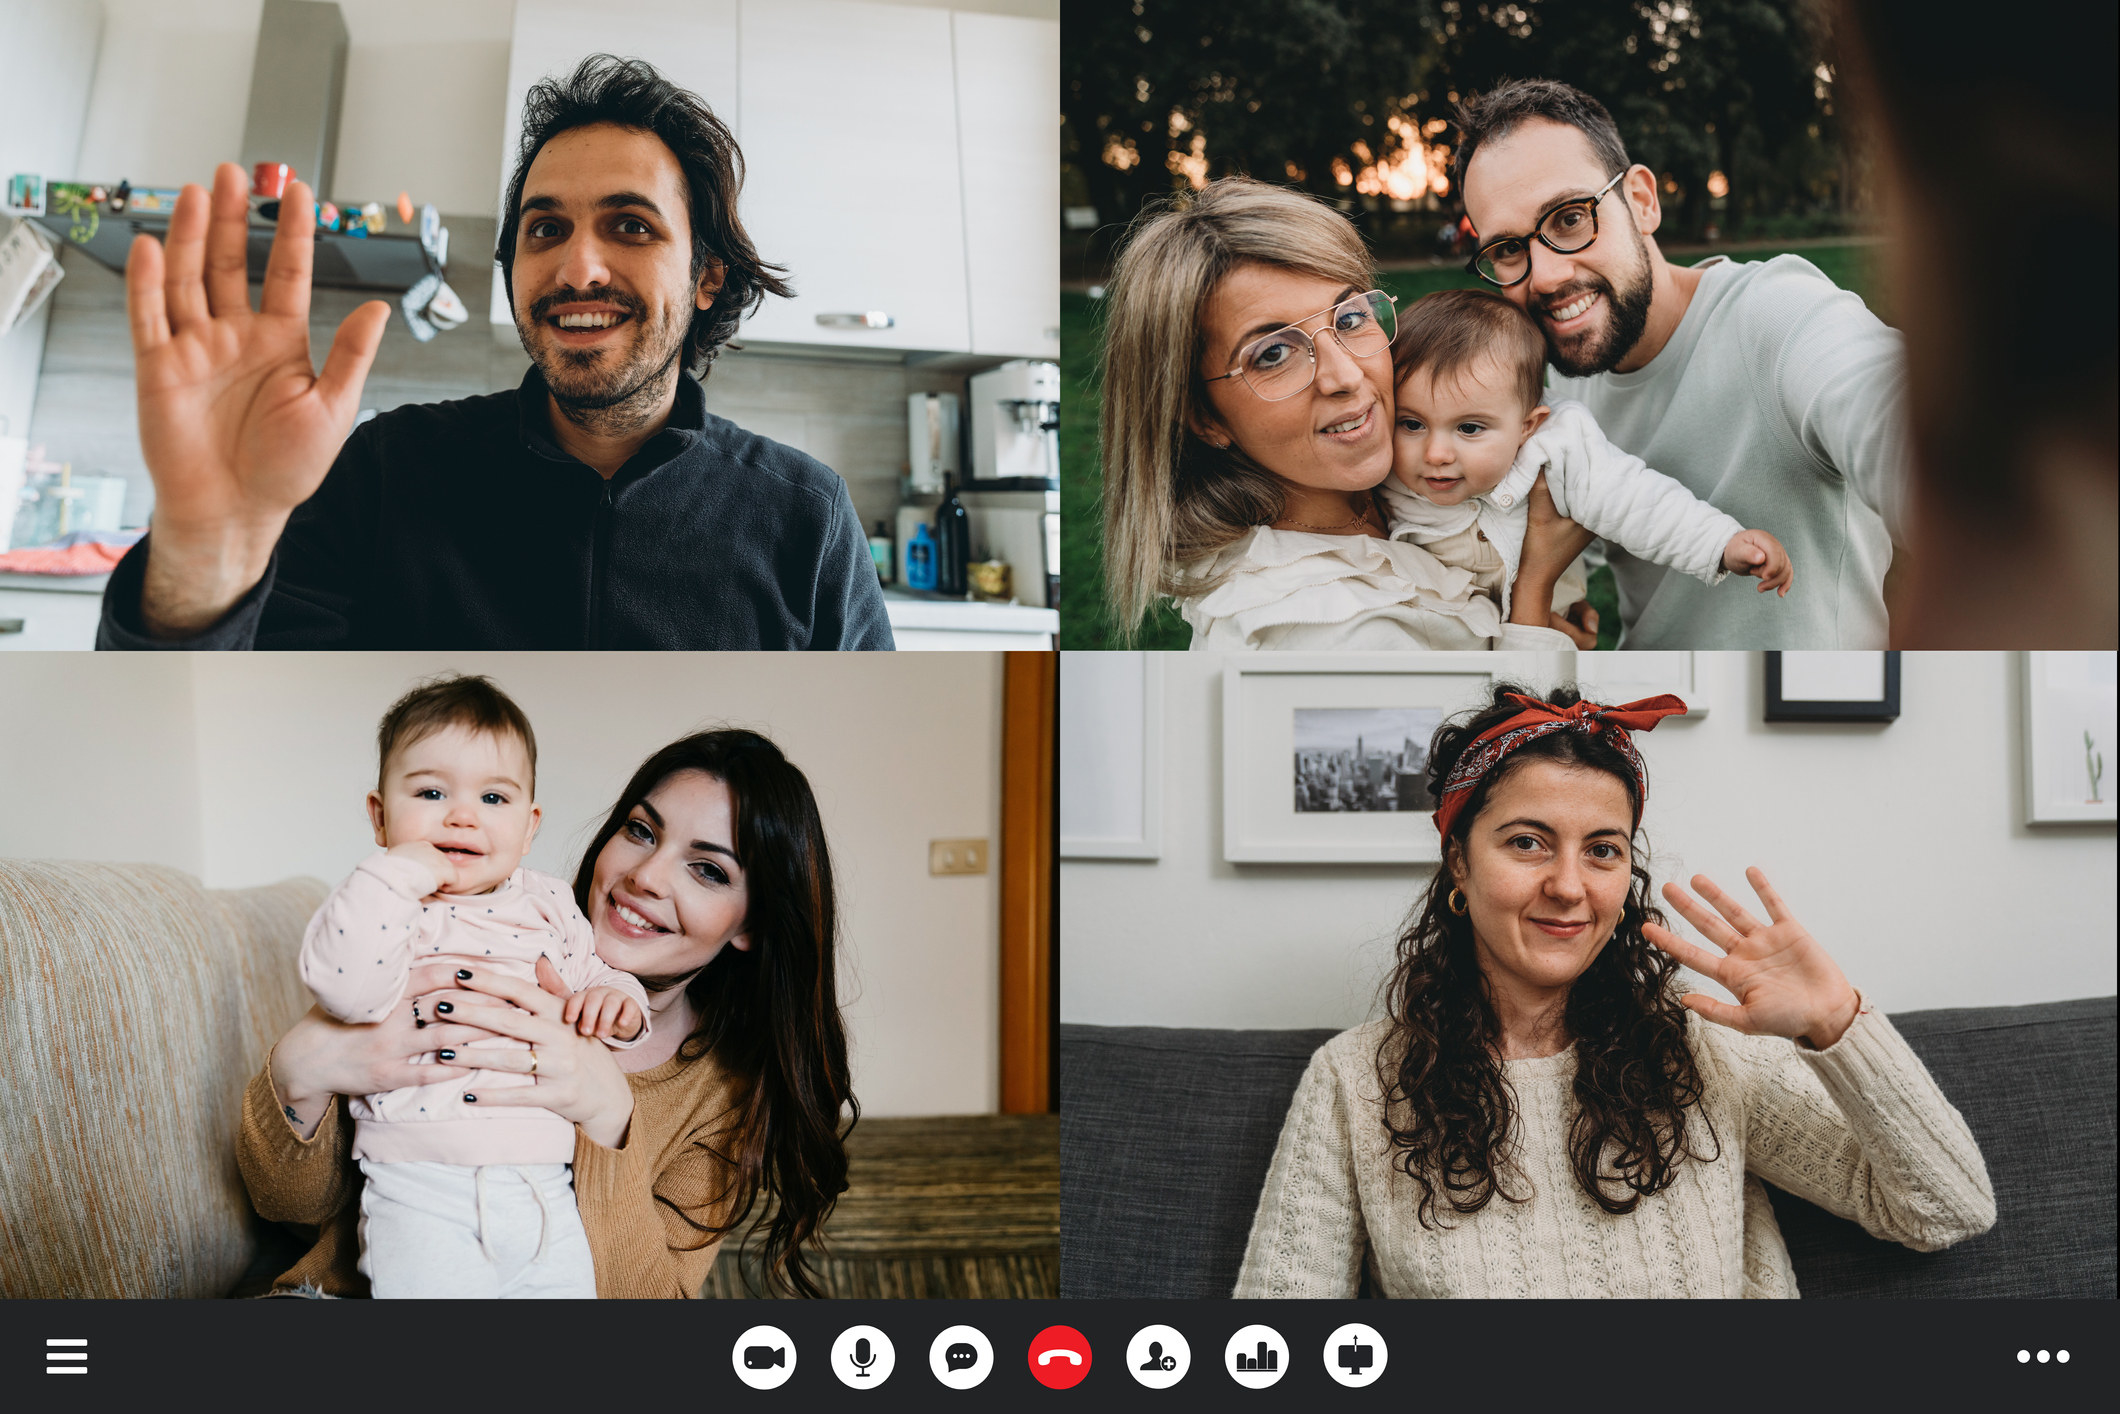 zoom call with families with babies and single friends